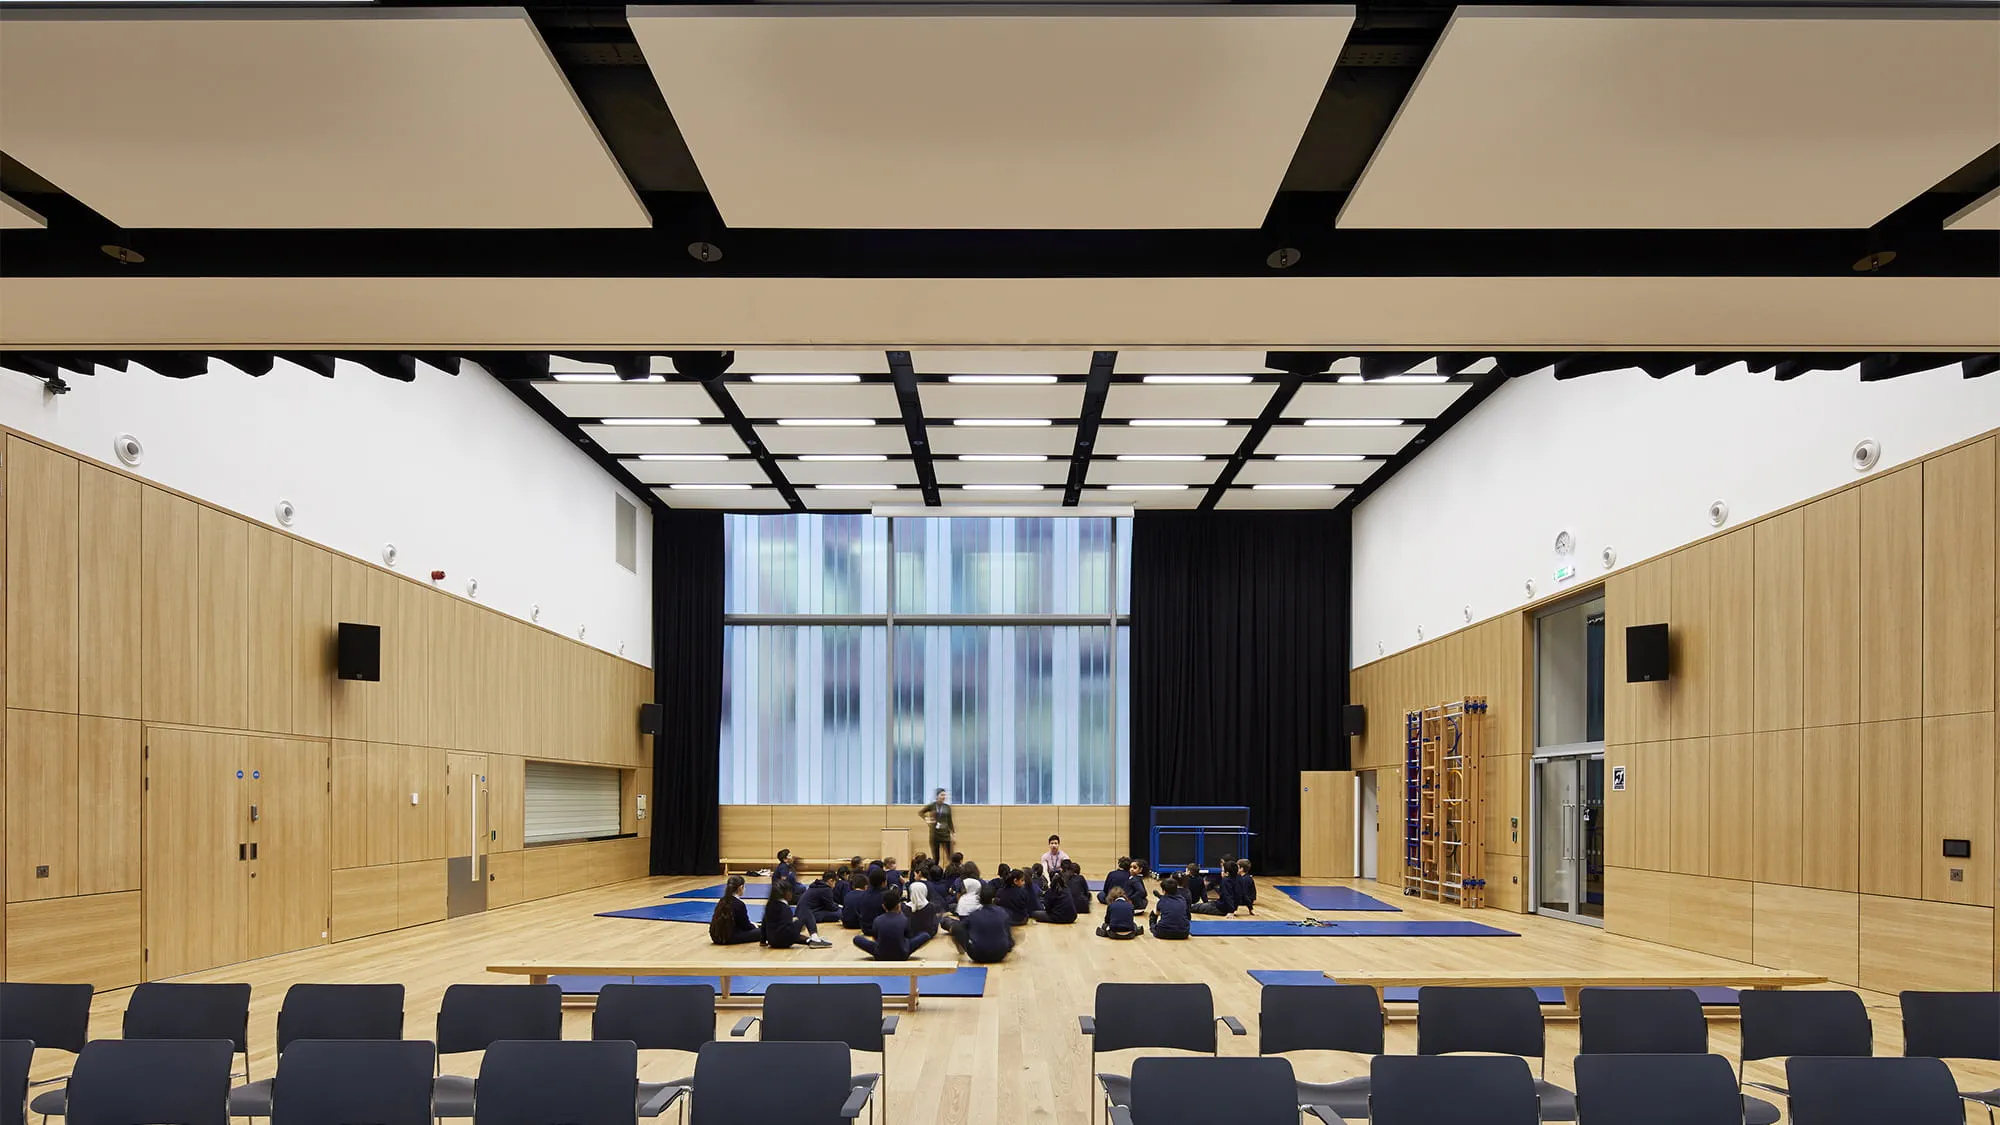 Bright, airy classrooms